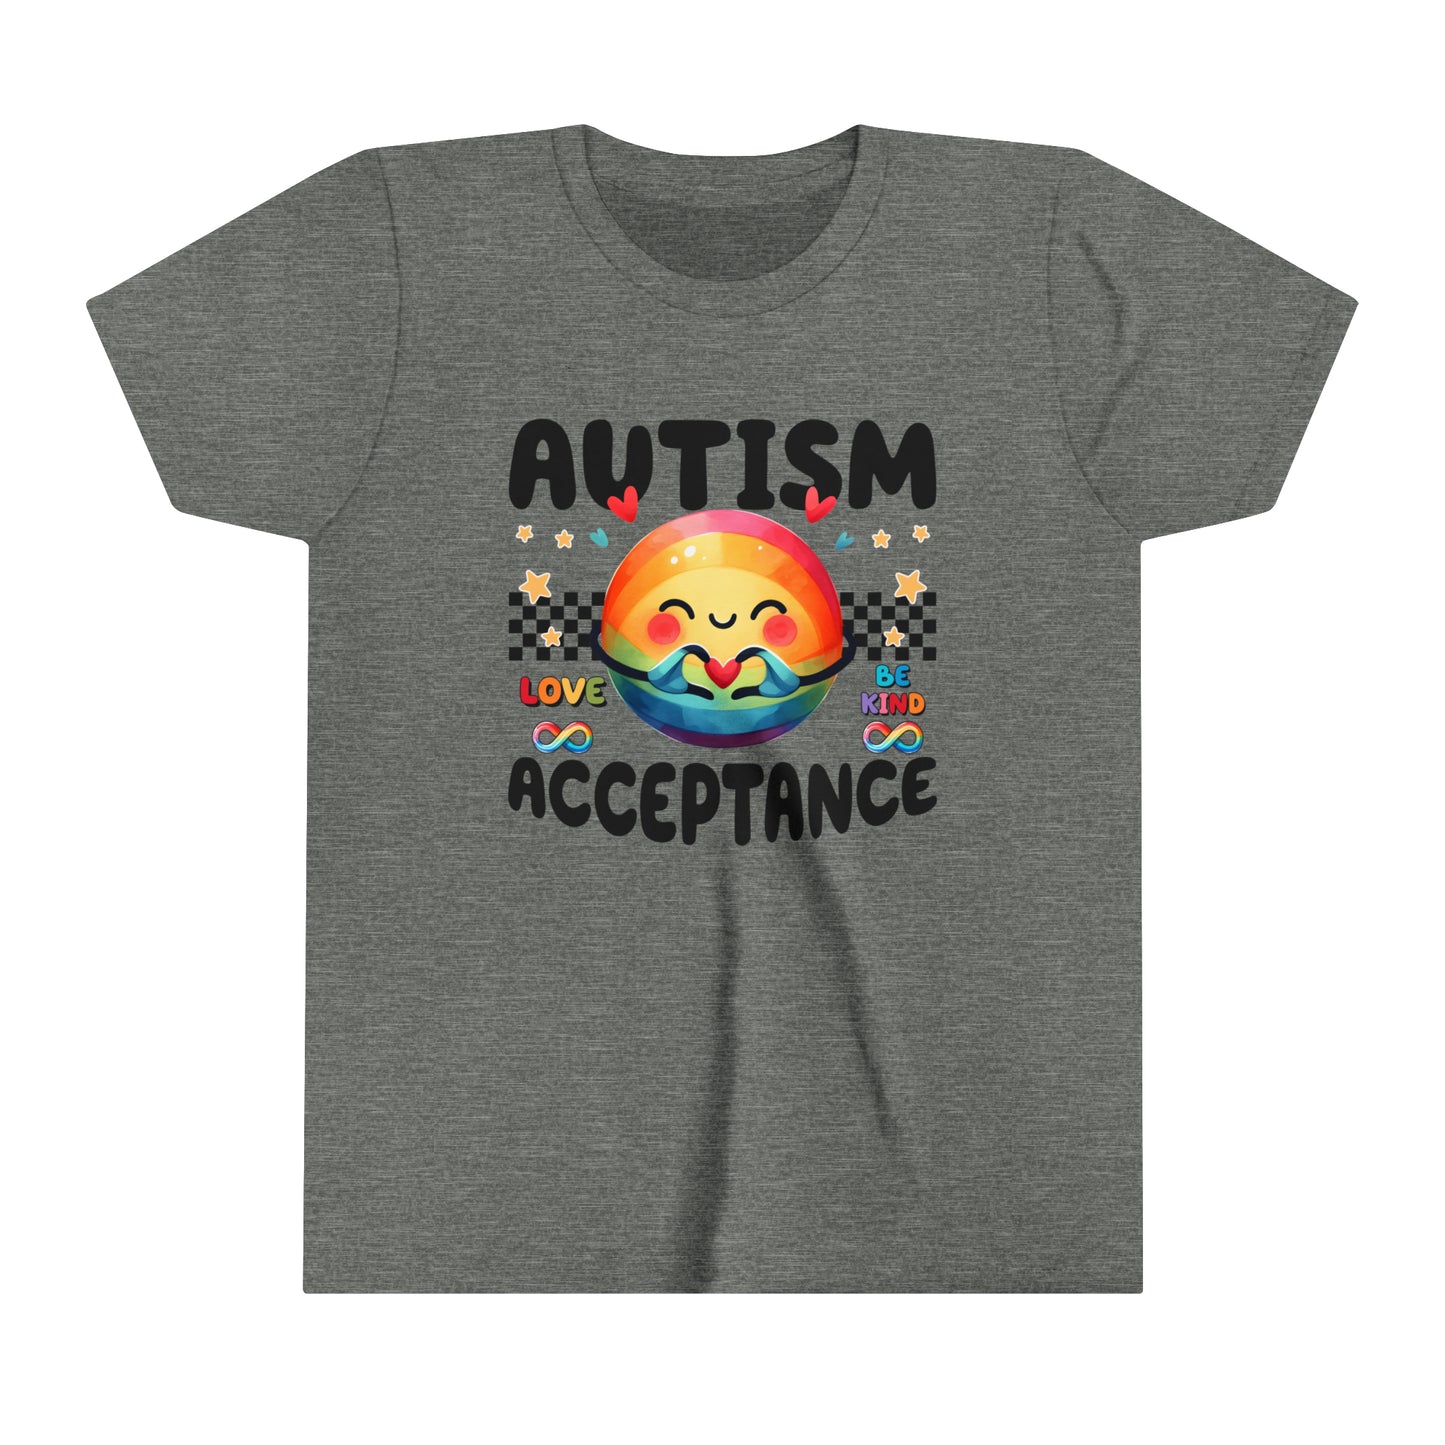 Autism Acceptance Advocate Youth Shirt